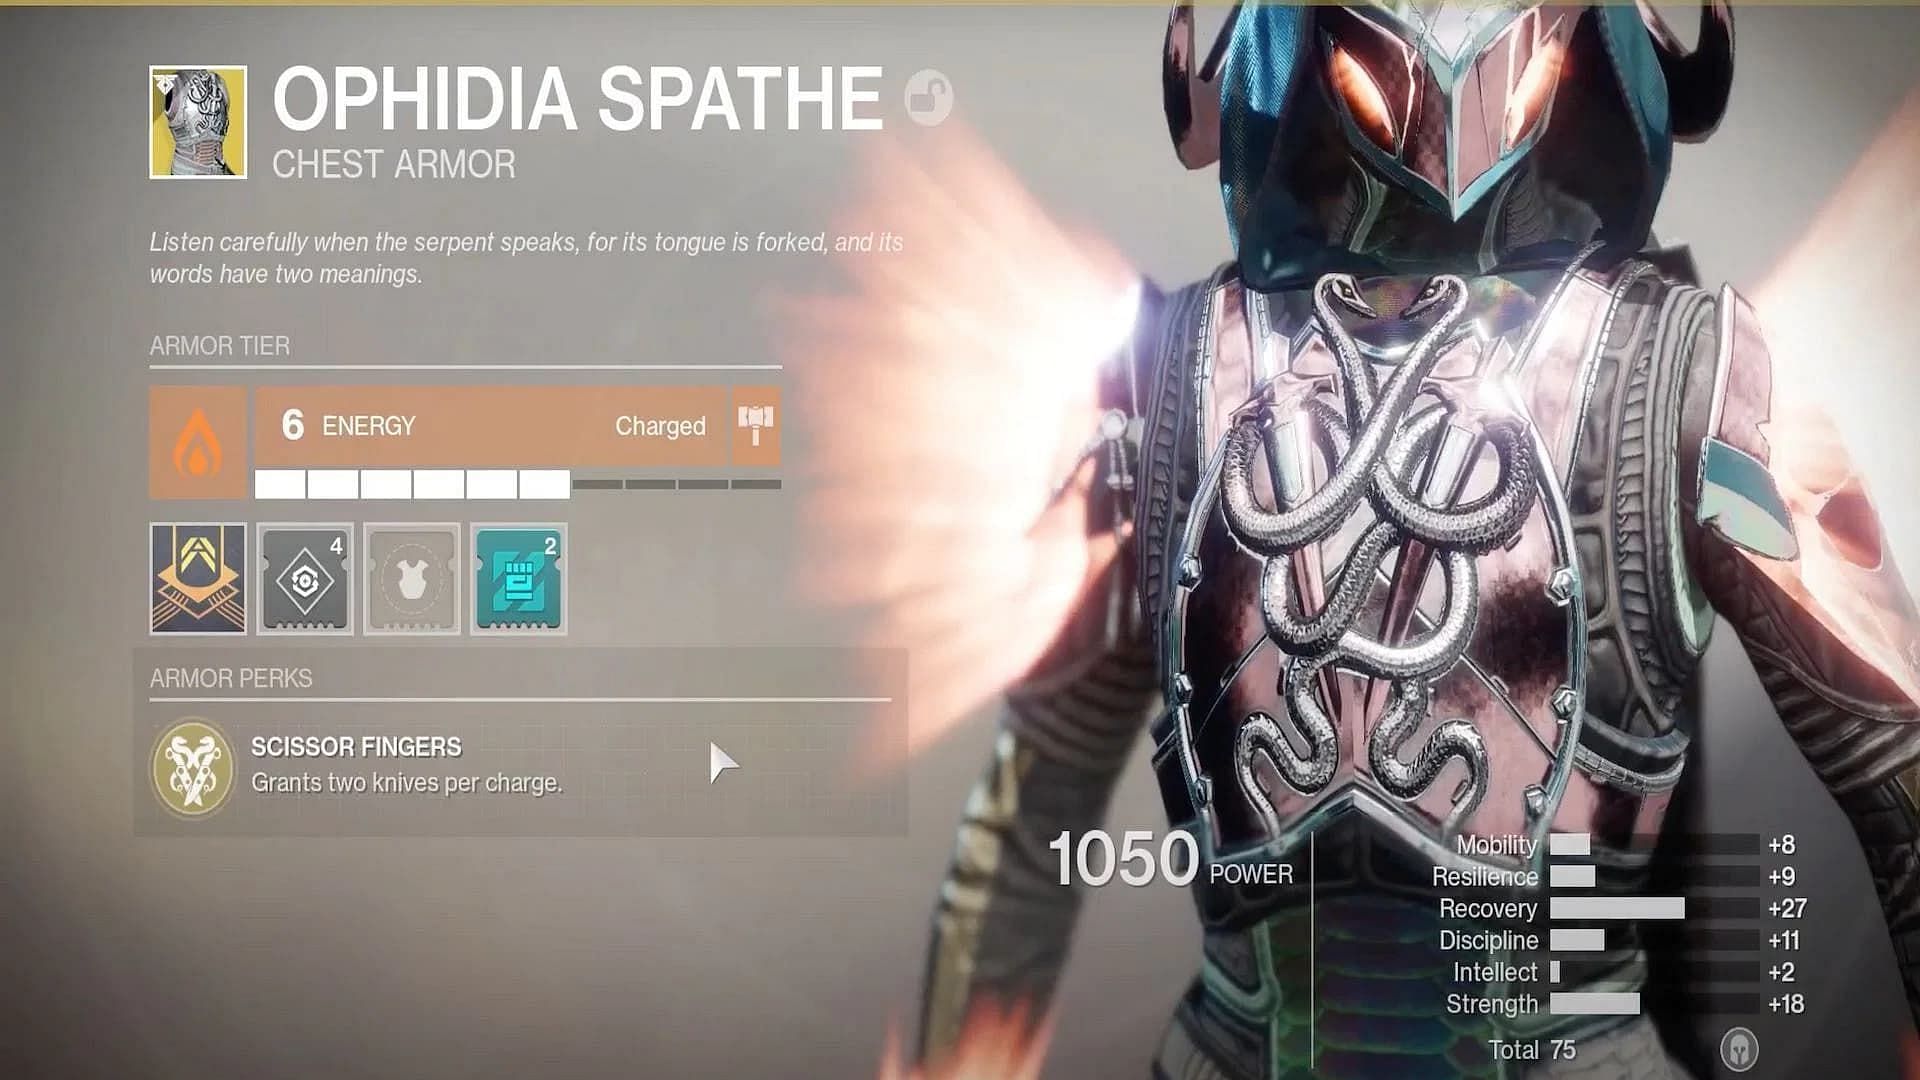 Ophidia Spathe Exotic chest armor will keep the throwing knives coming (Image via Bungie)